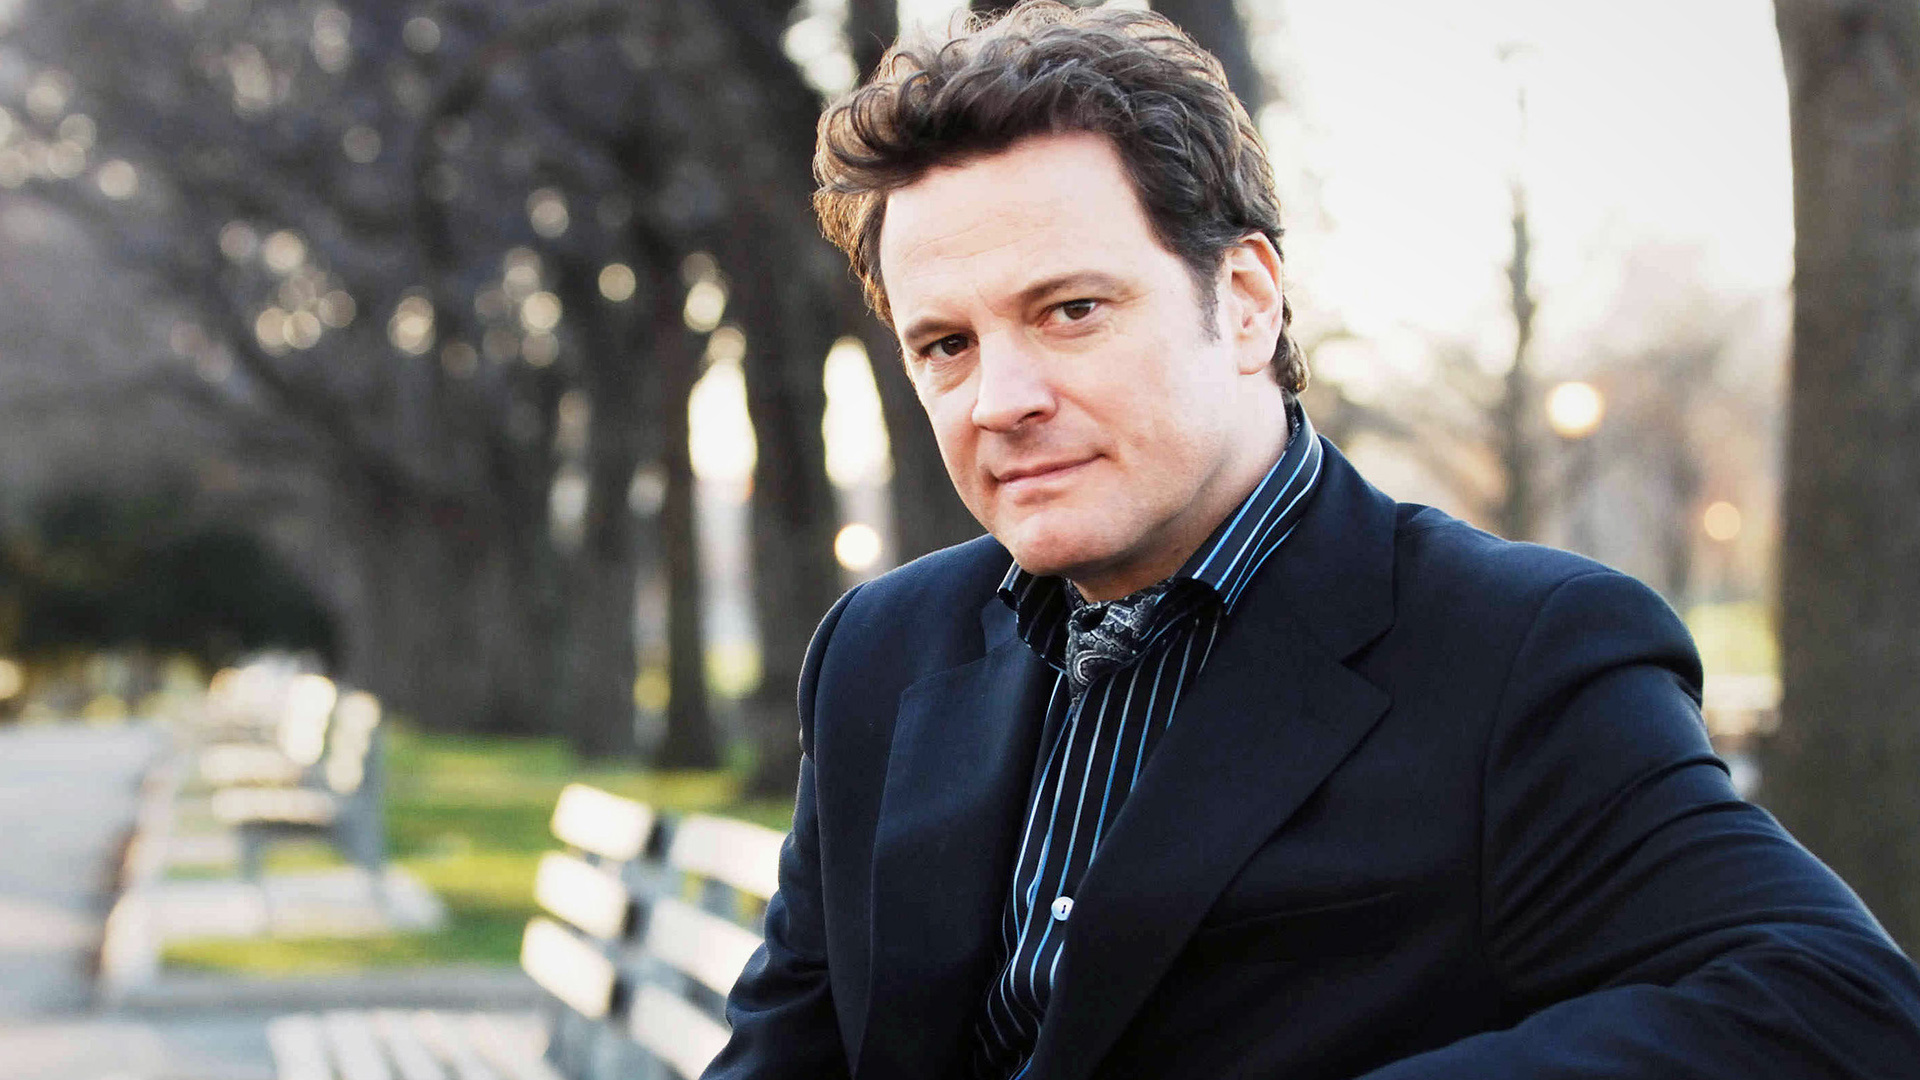 Free wallpapers, High-quality images, Colin Firth collection, 1920x1080 Full HD Desktop